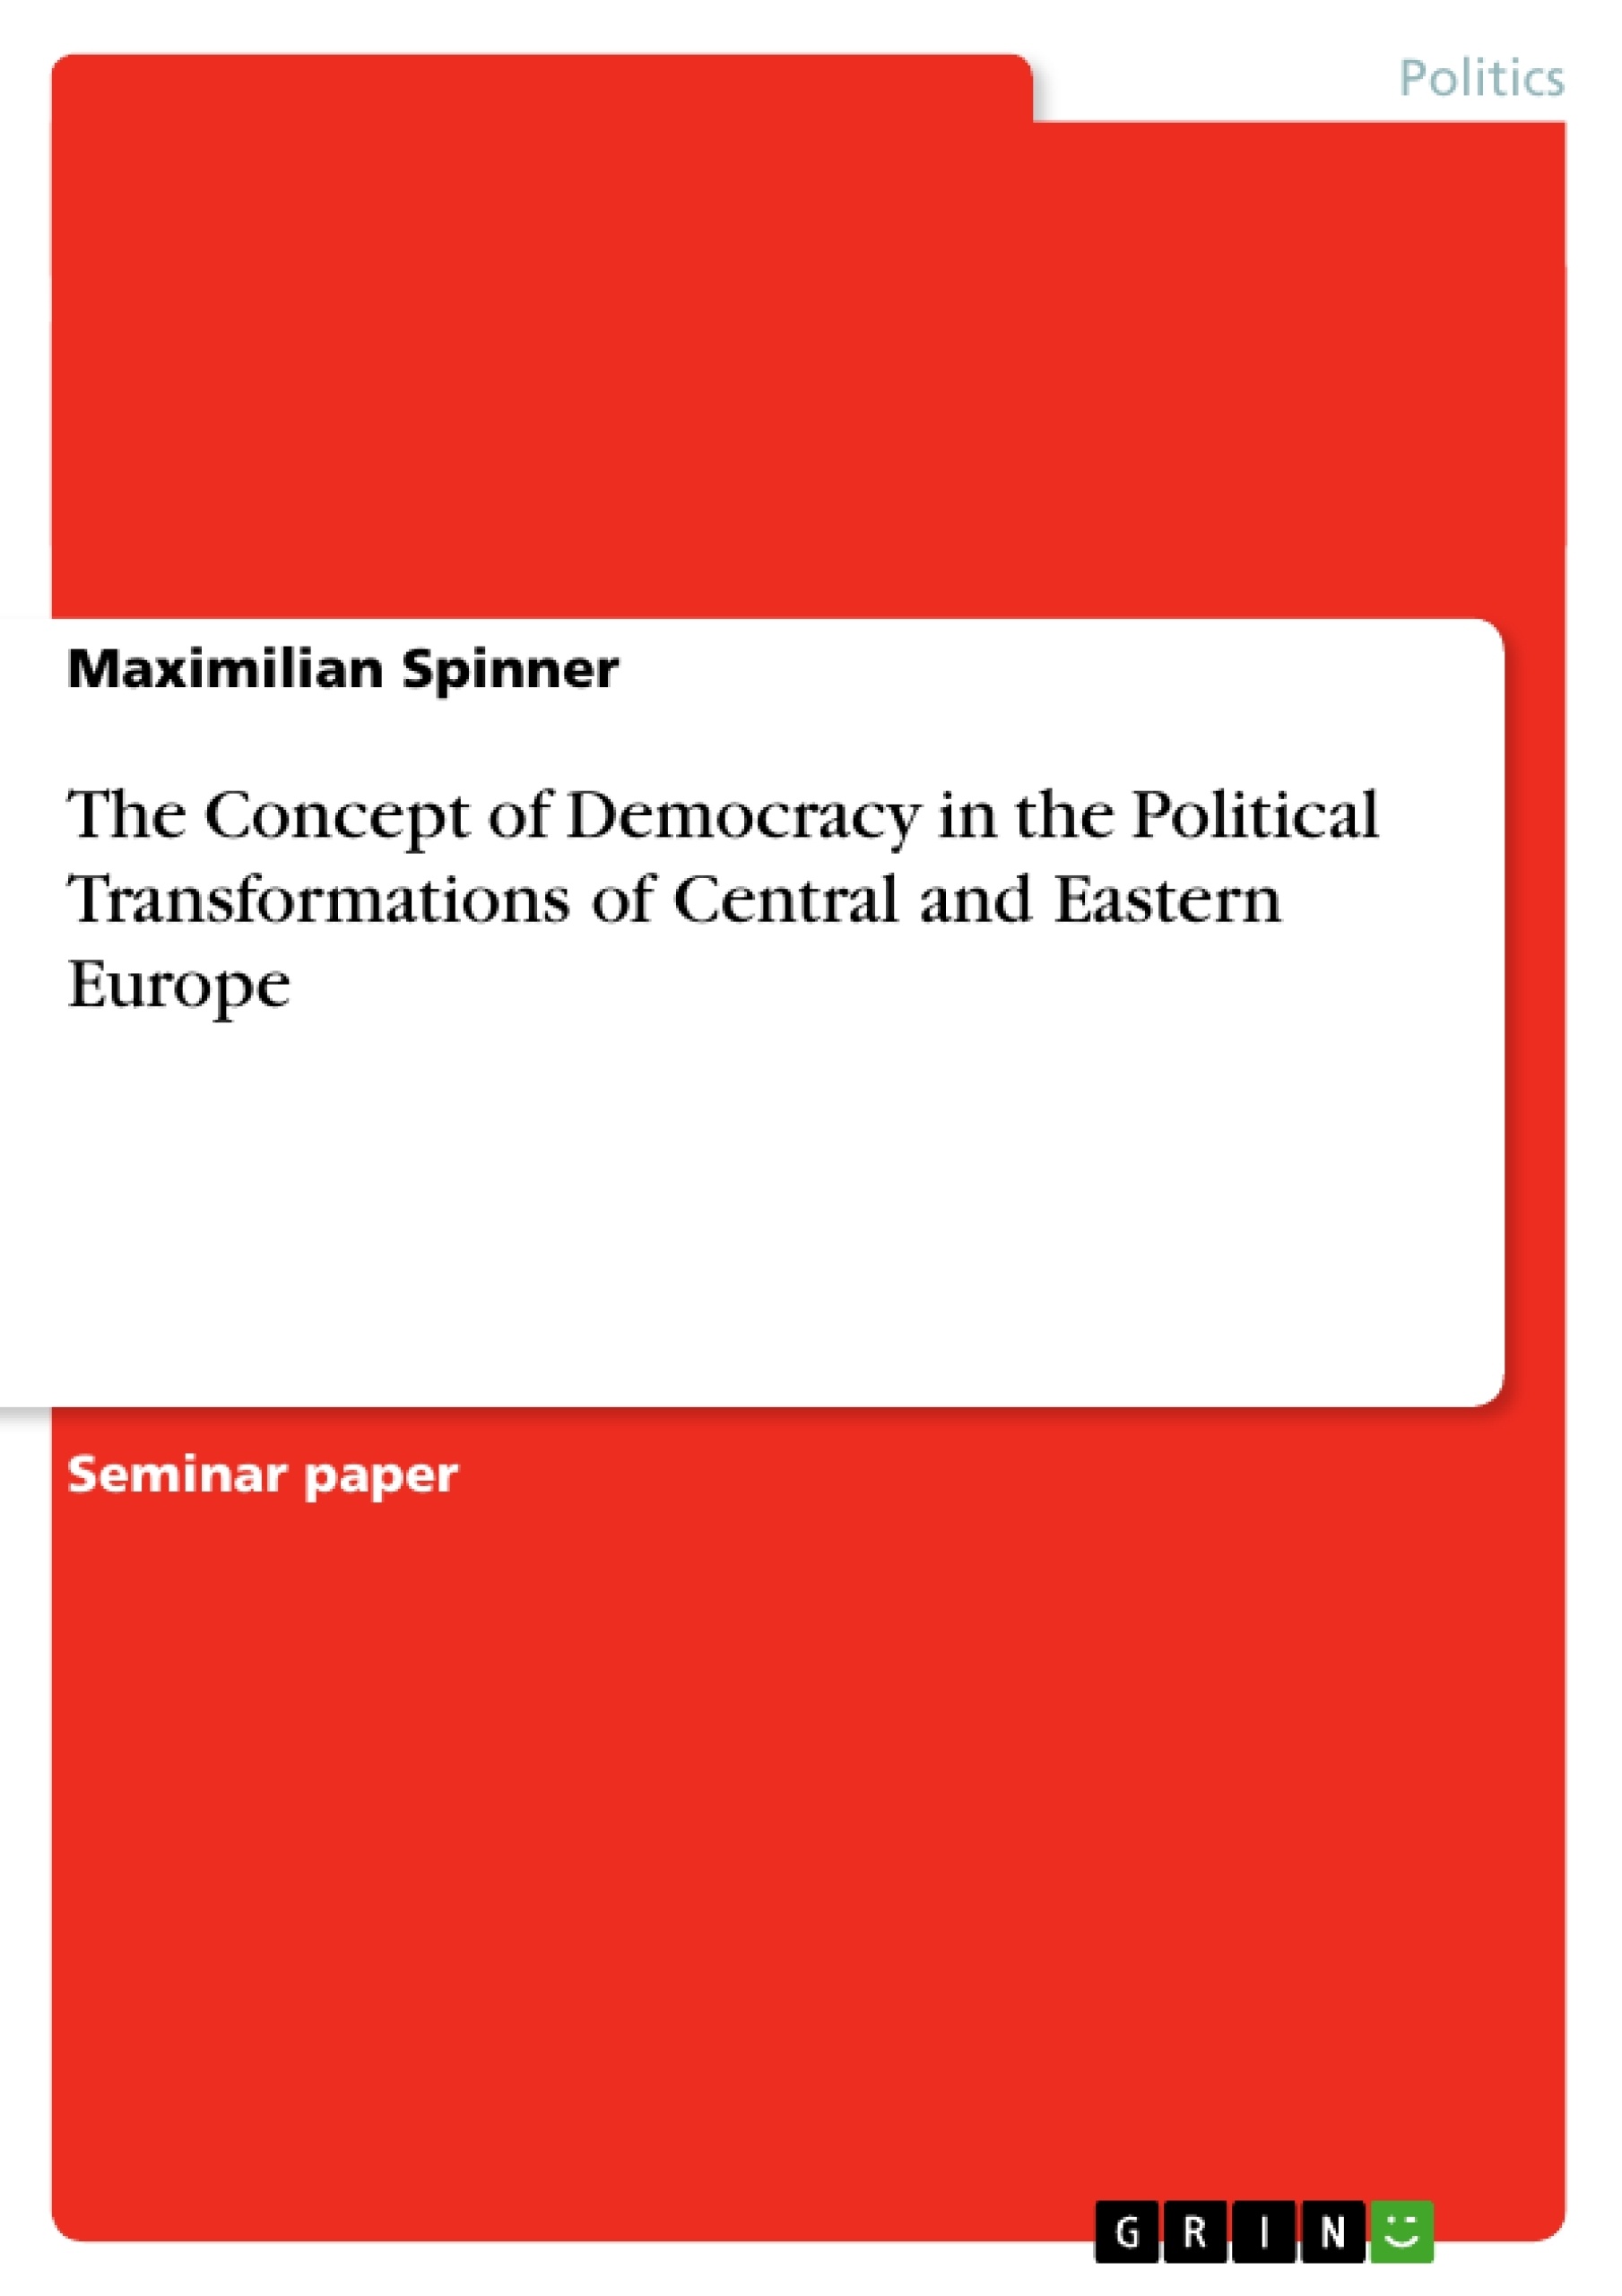 Title: The Concept of Democracy in the Political Transformations of Central and Eastern Europe